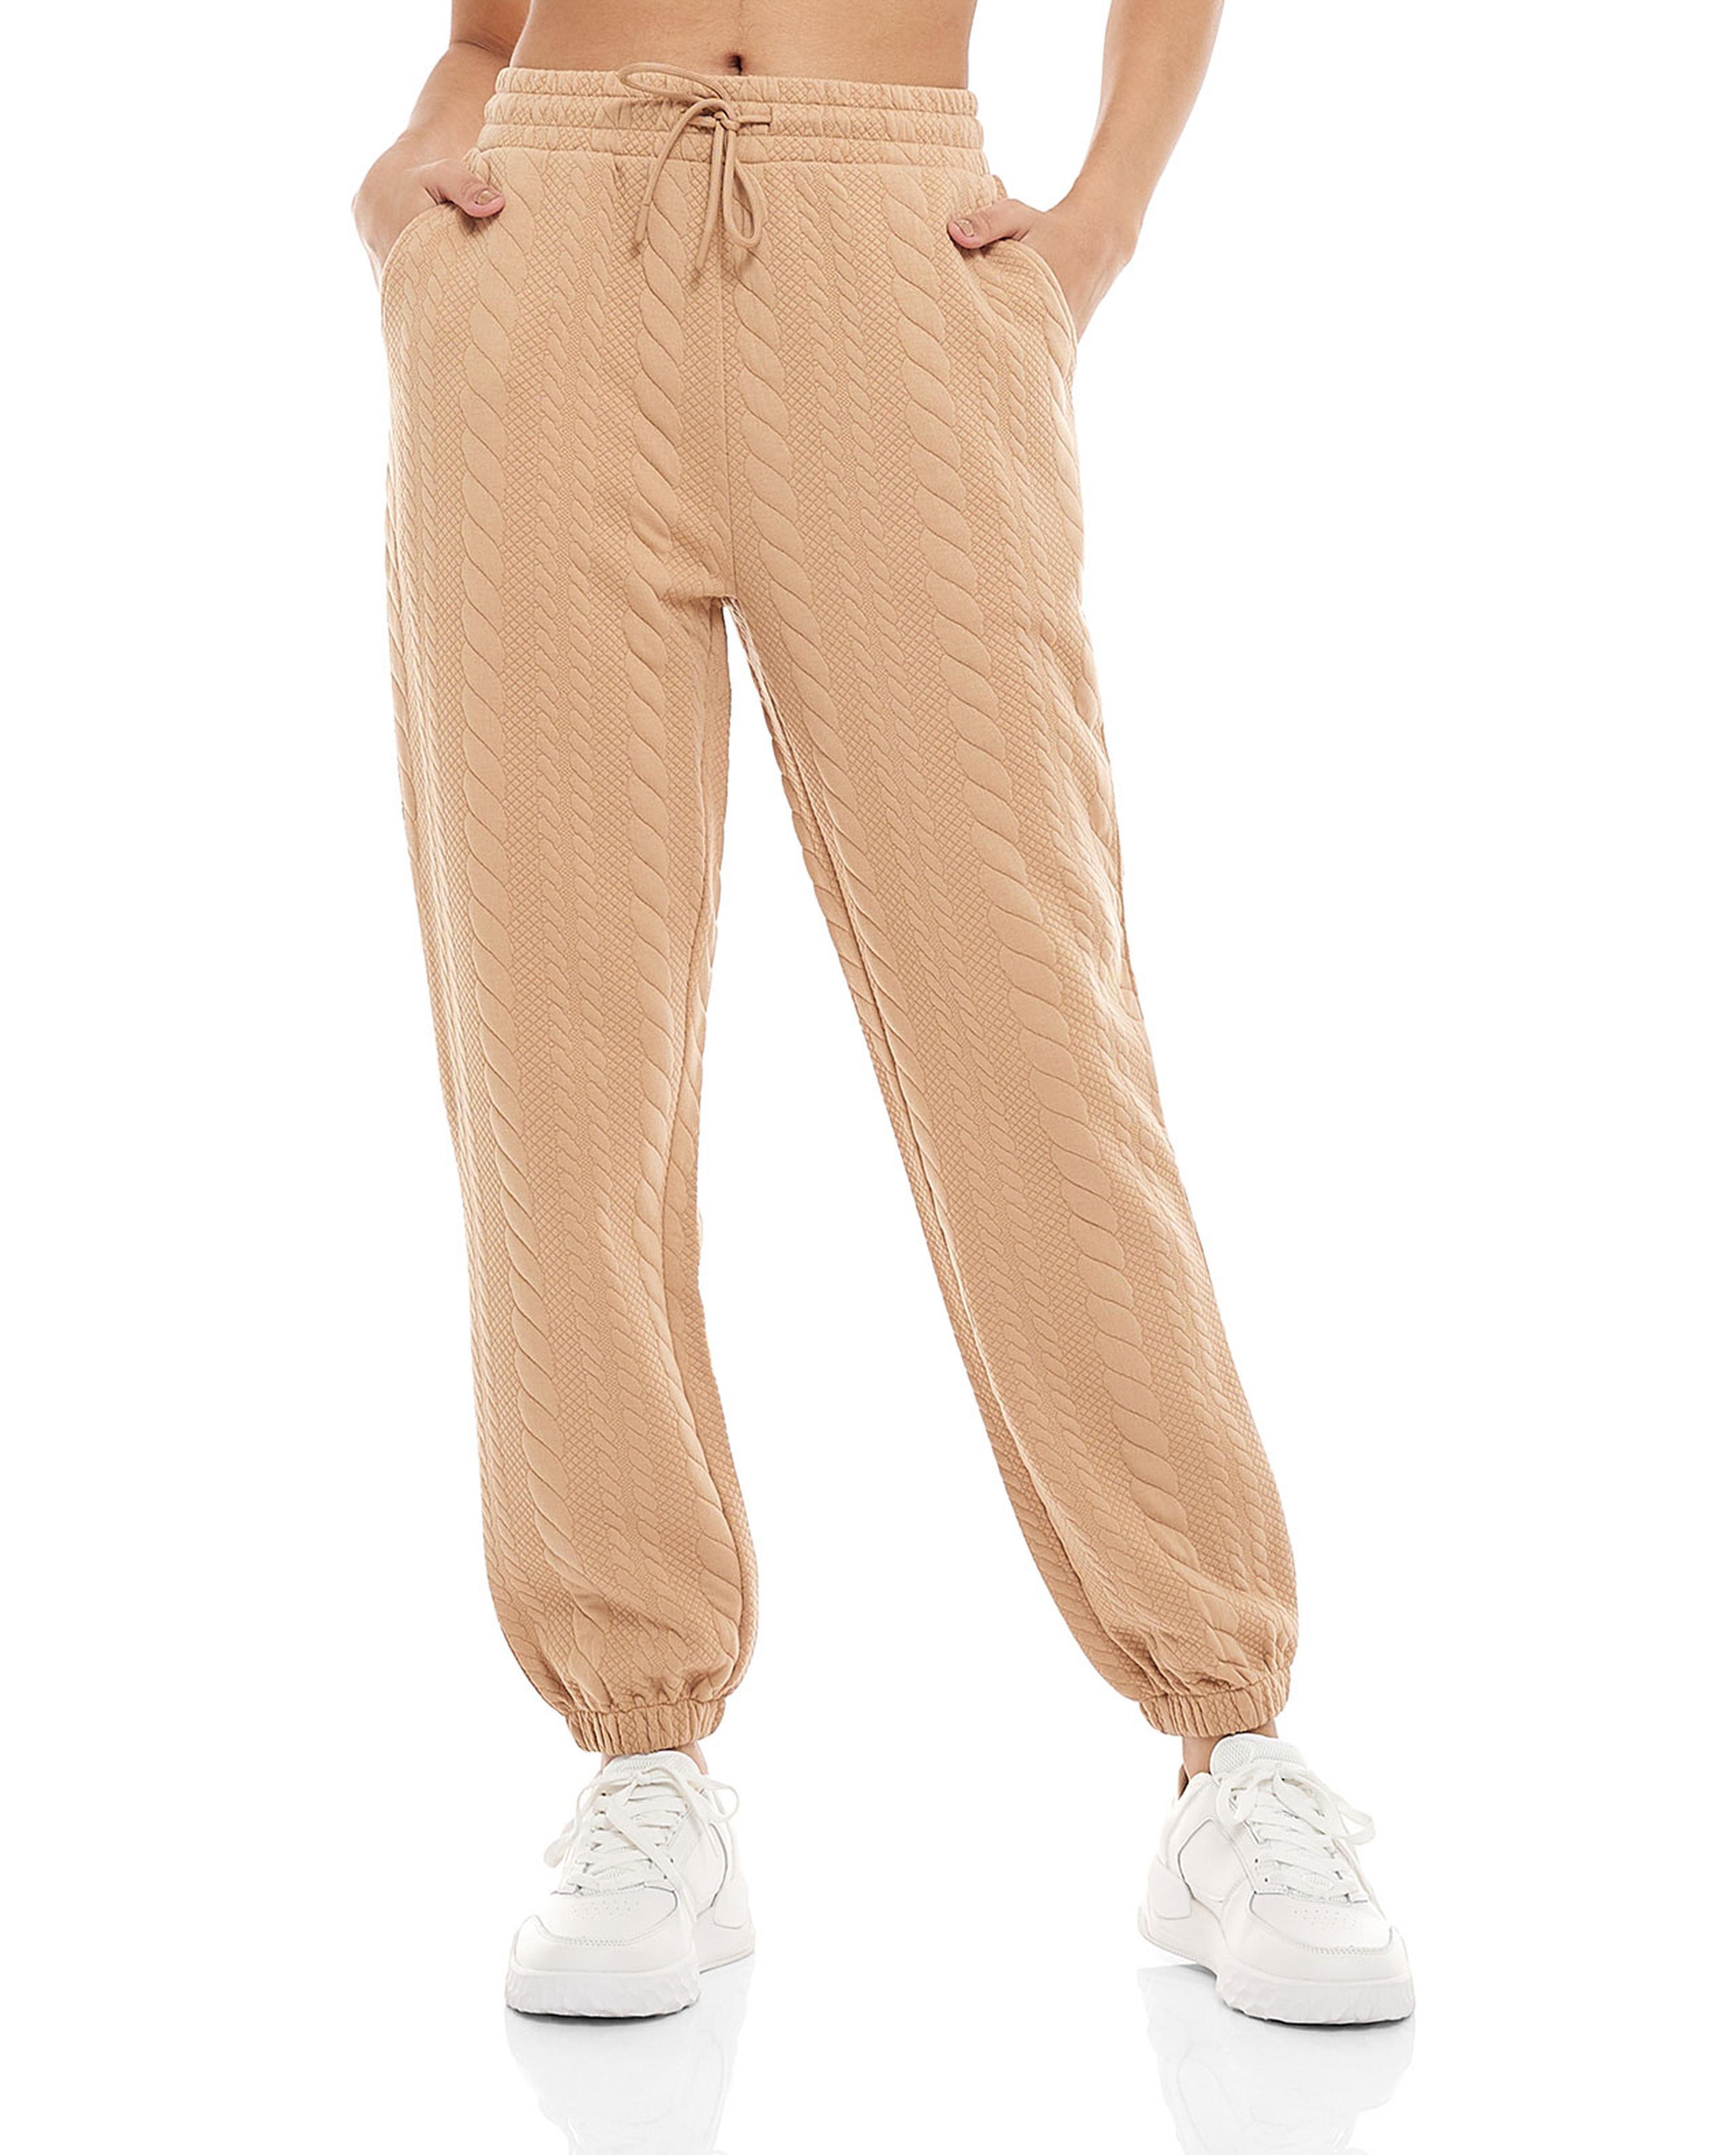 Self Patterned Joggers with Drawstring Waist